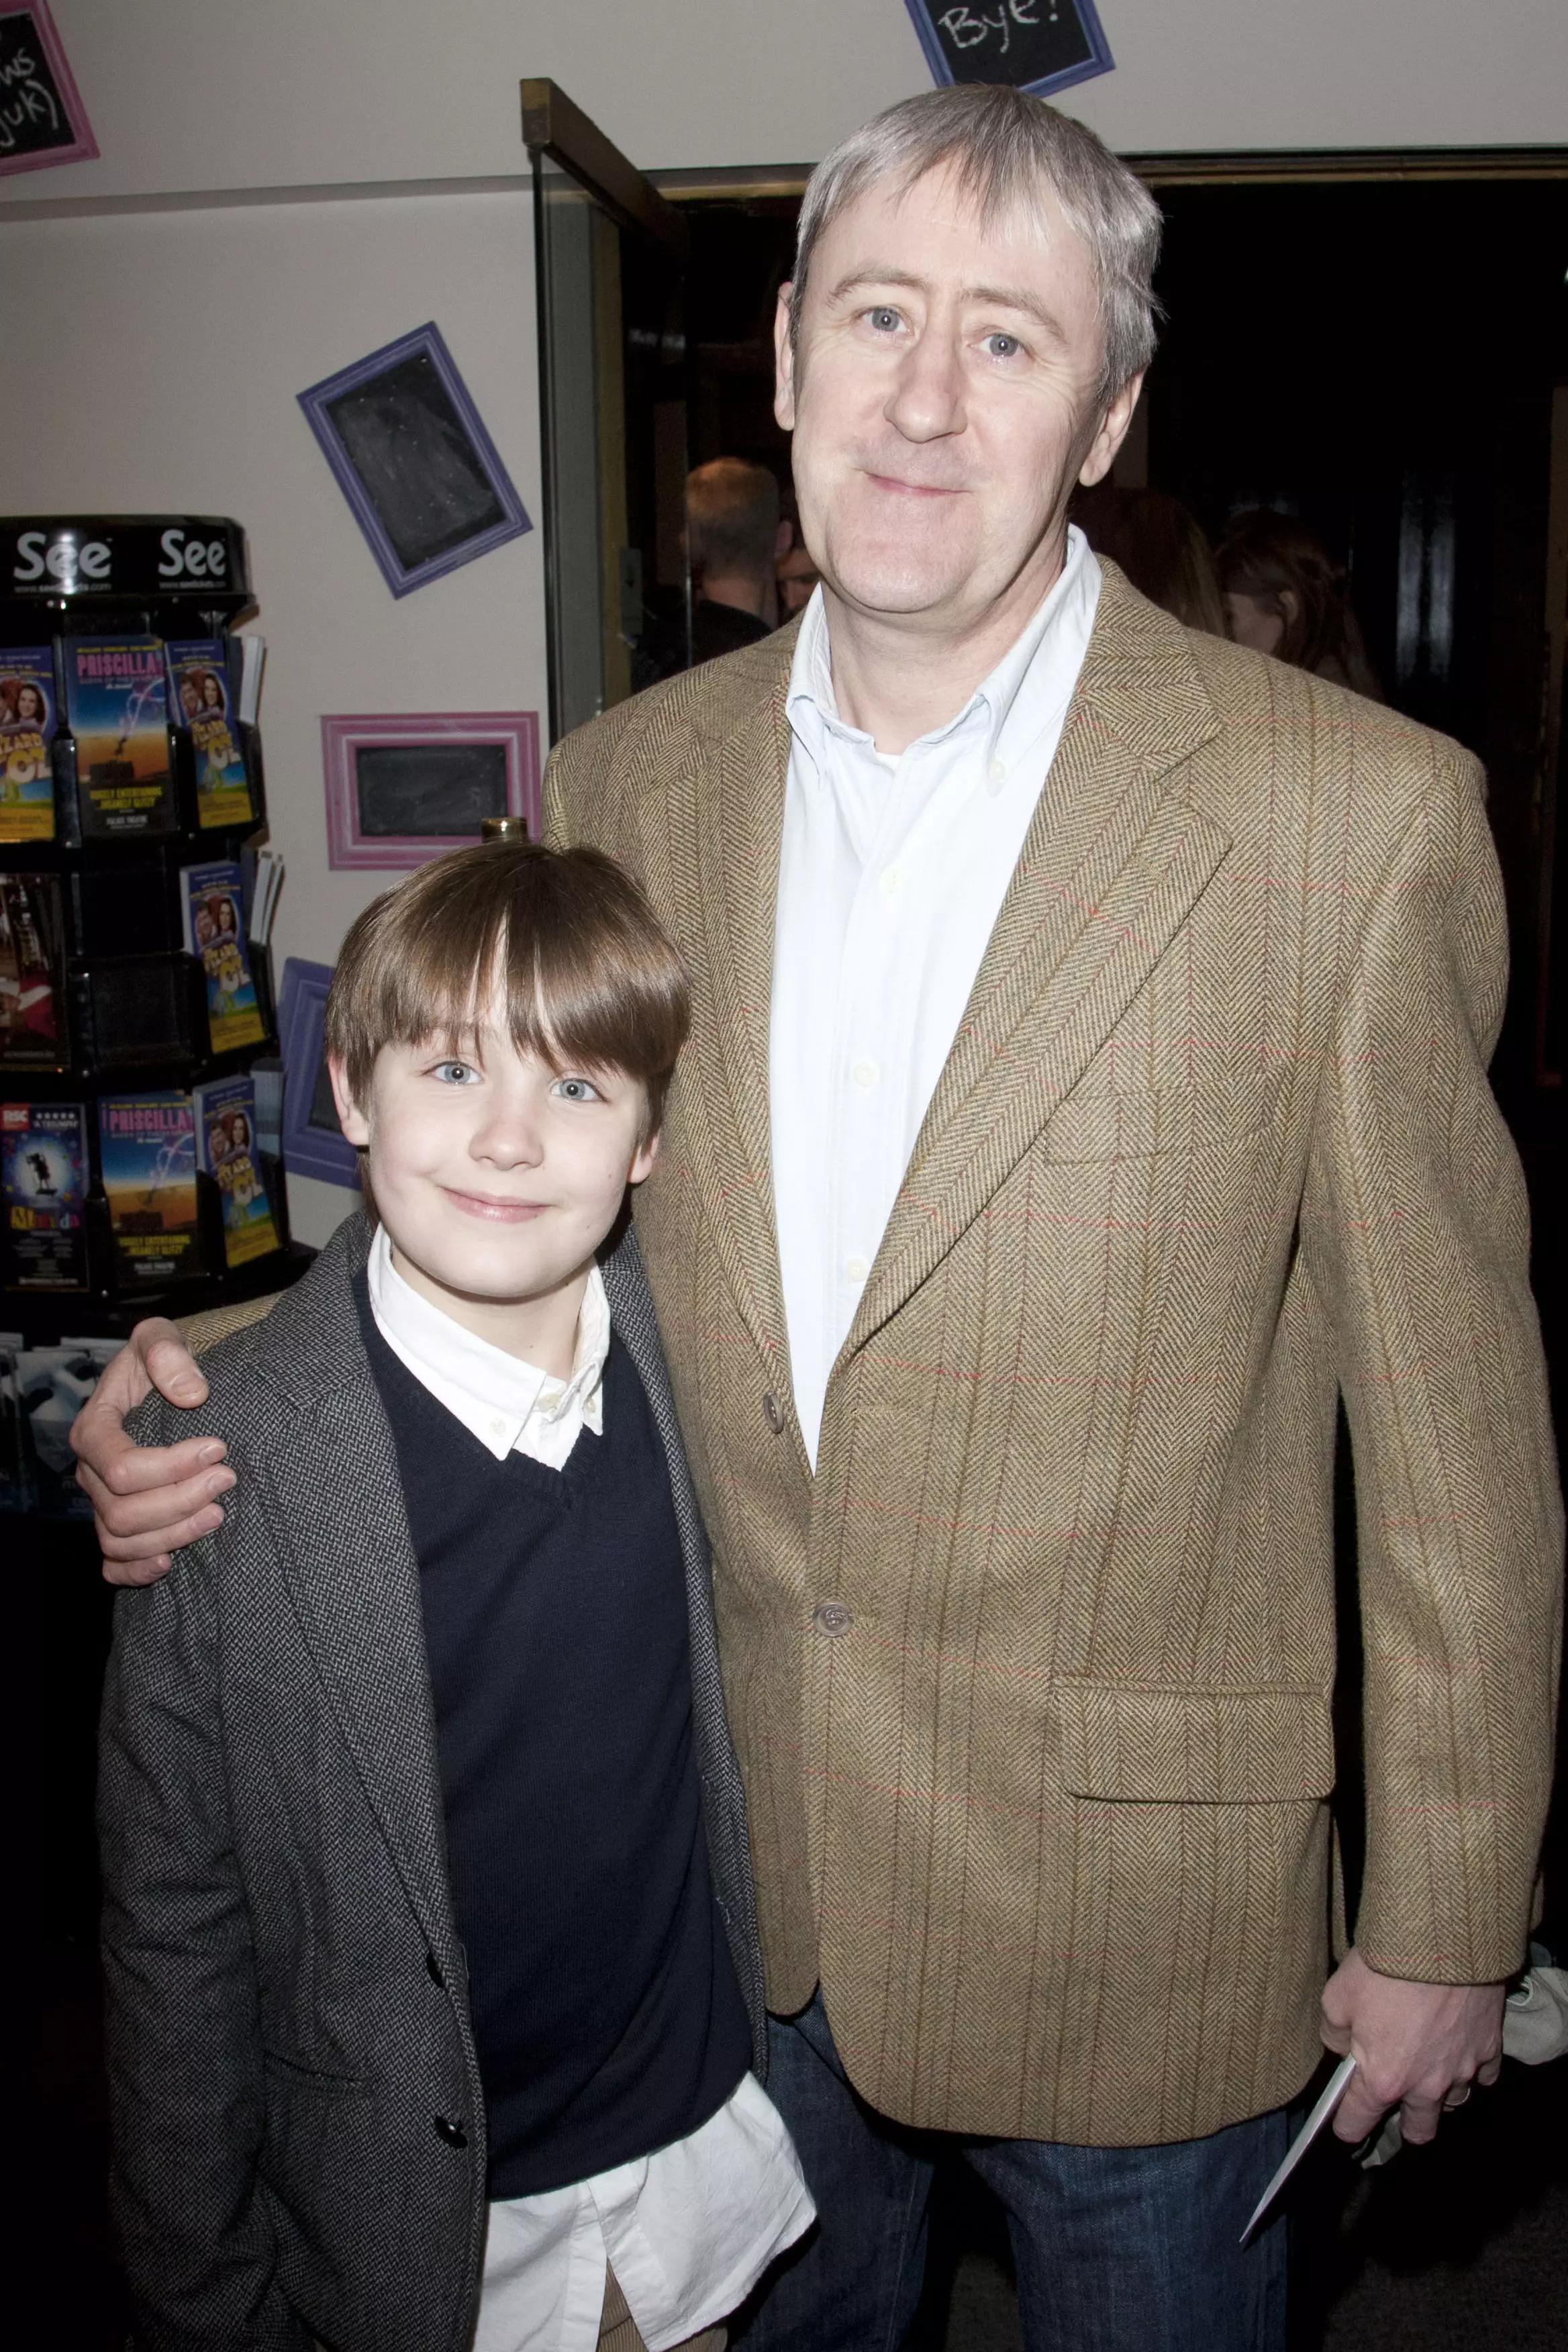 Archie with Nicholas back in 2011.